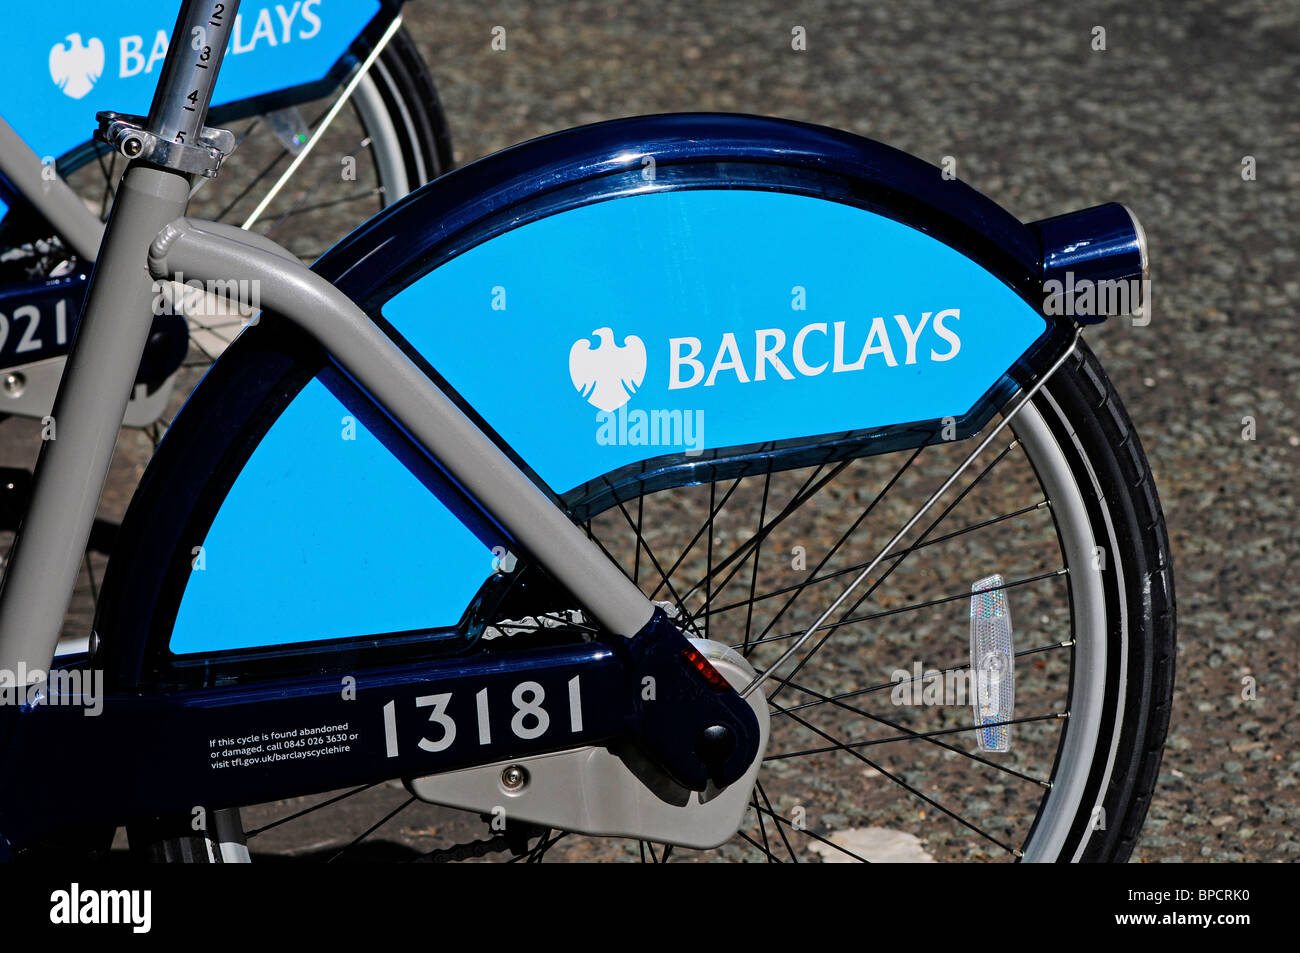 Transport for London / Barclays cycle hire scheme, Londres, Angleterre Banque D'Images